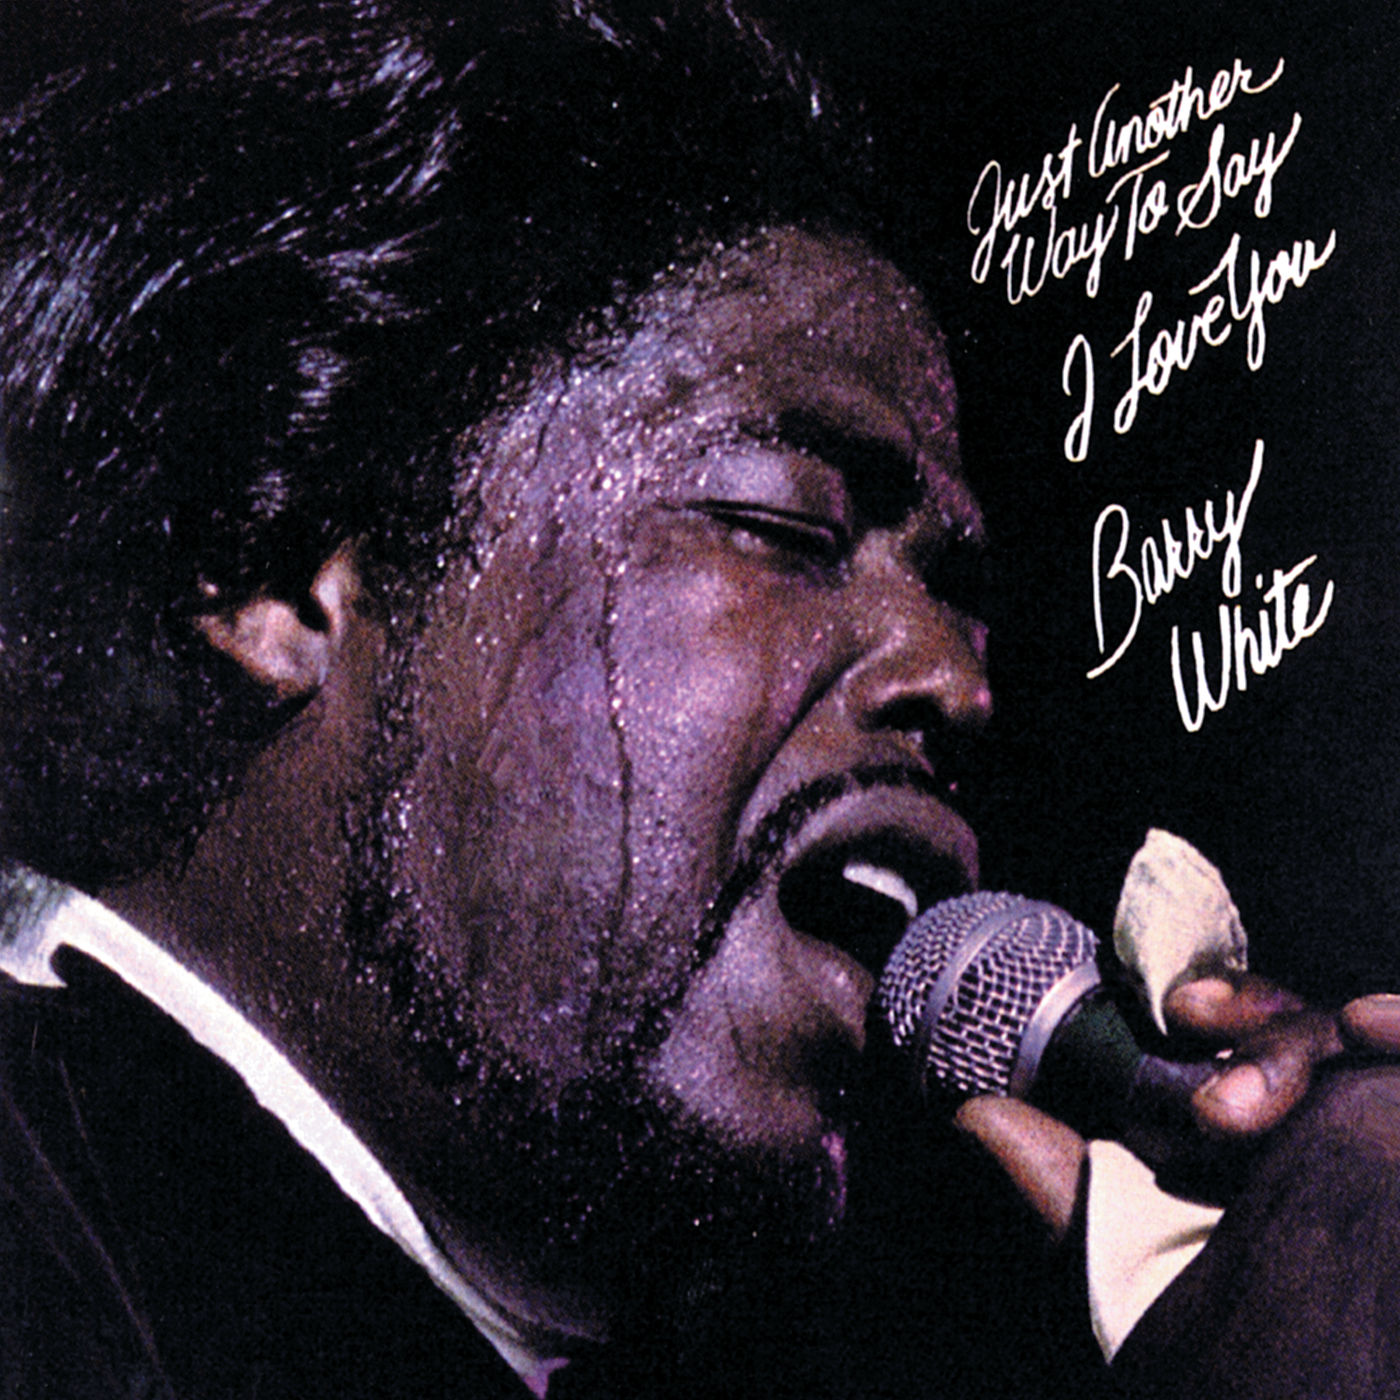 Barry White – Just Another Way To Say I Love You (1975/2021) [FLAC 24bit/192kHz]